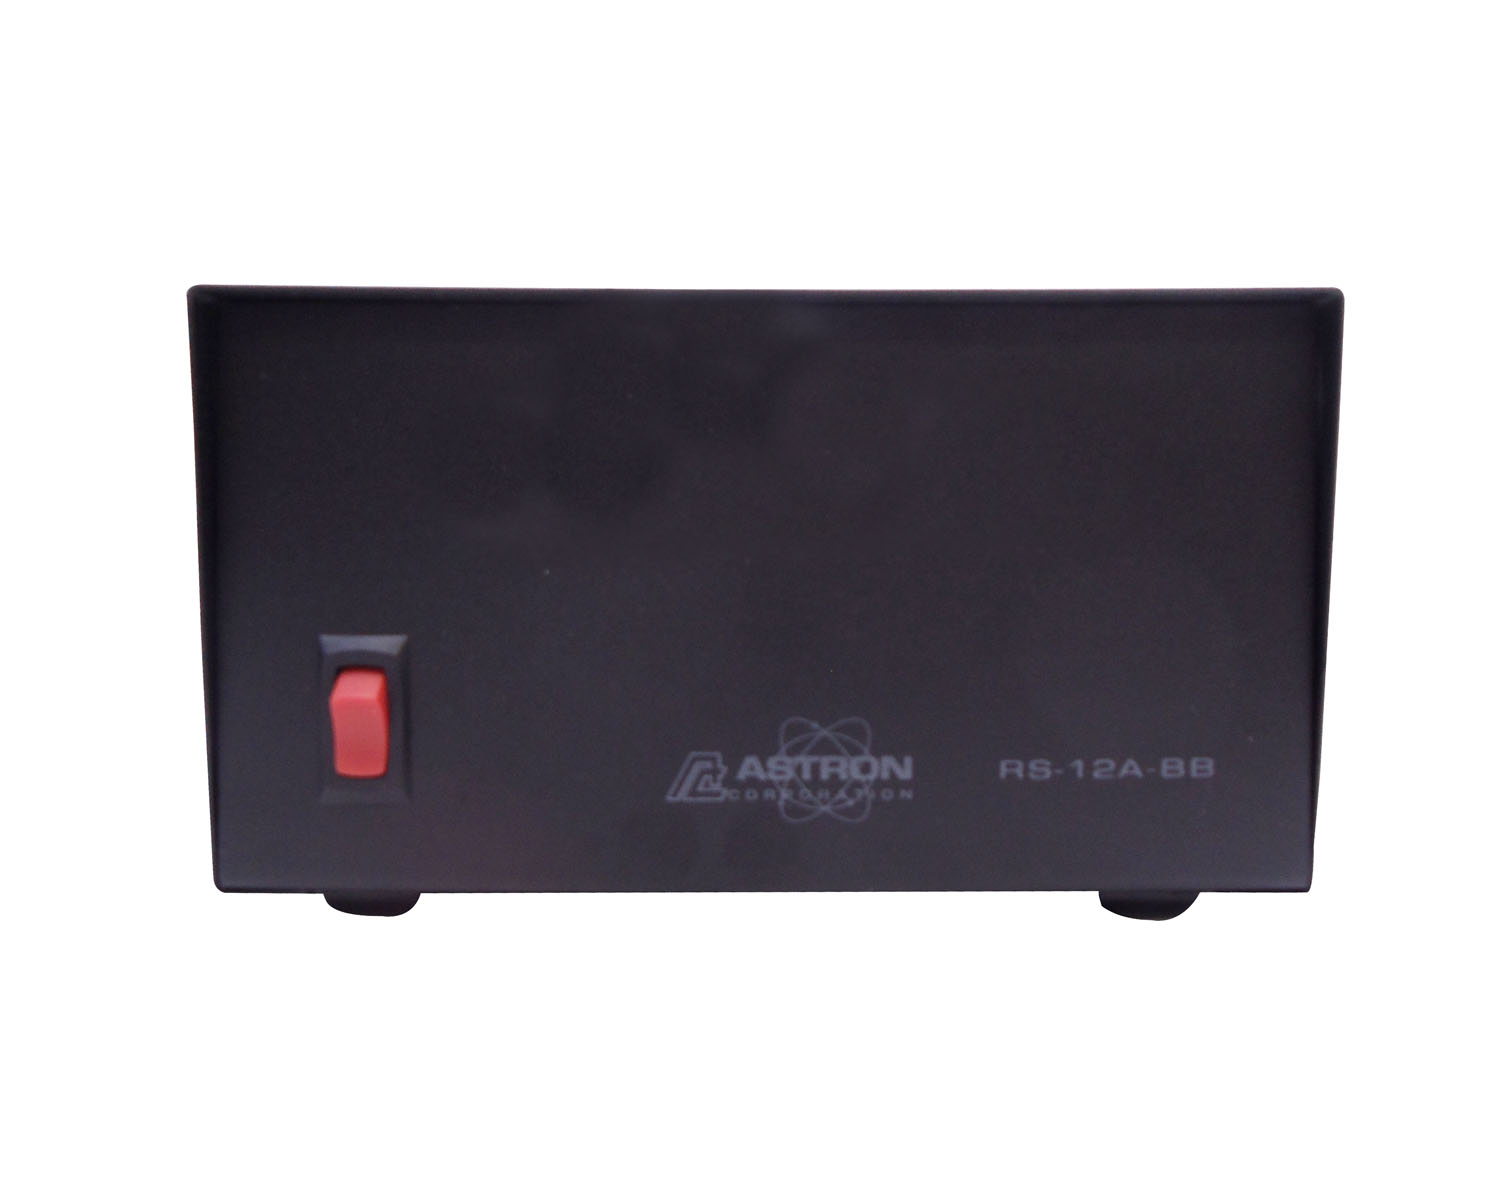 Astron - 11-15 Volt Adjustable 9Amp Linear Power Supply